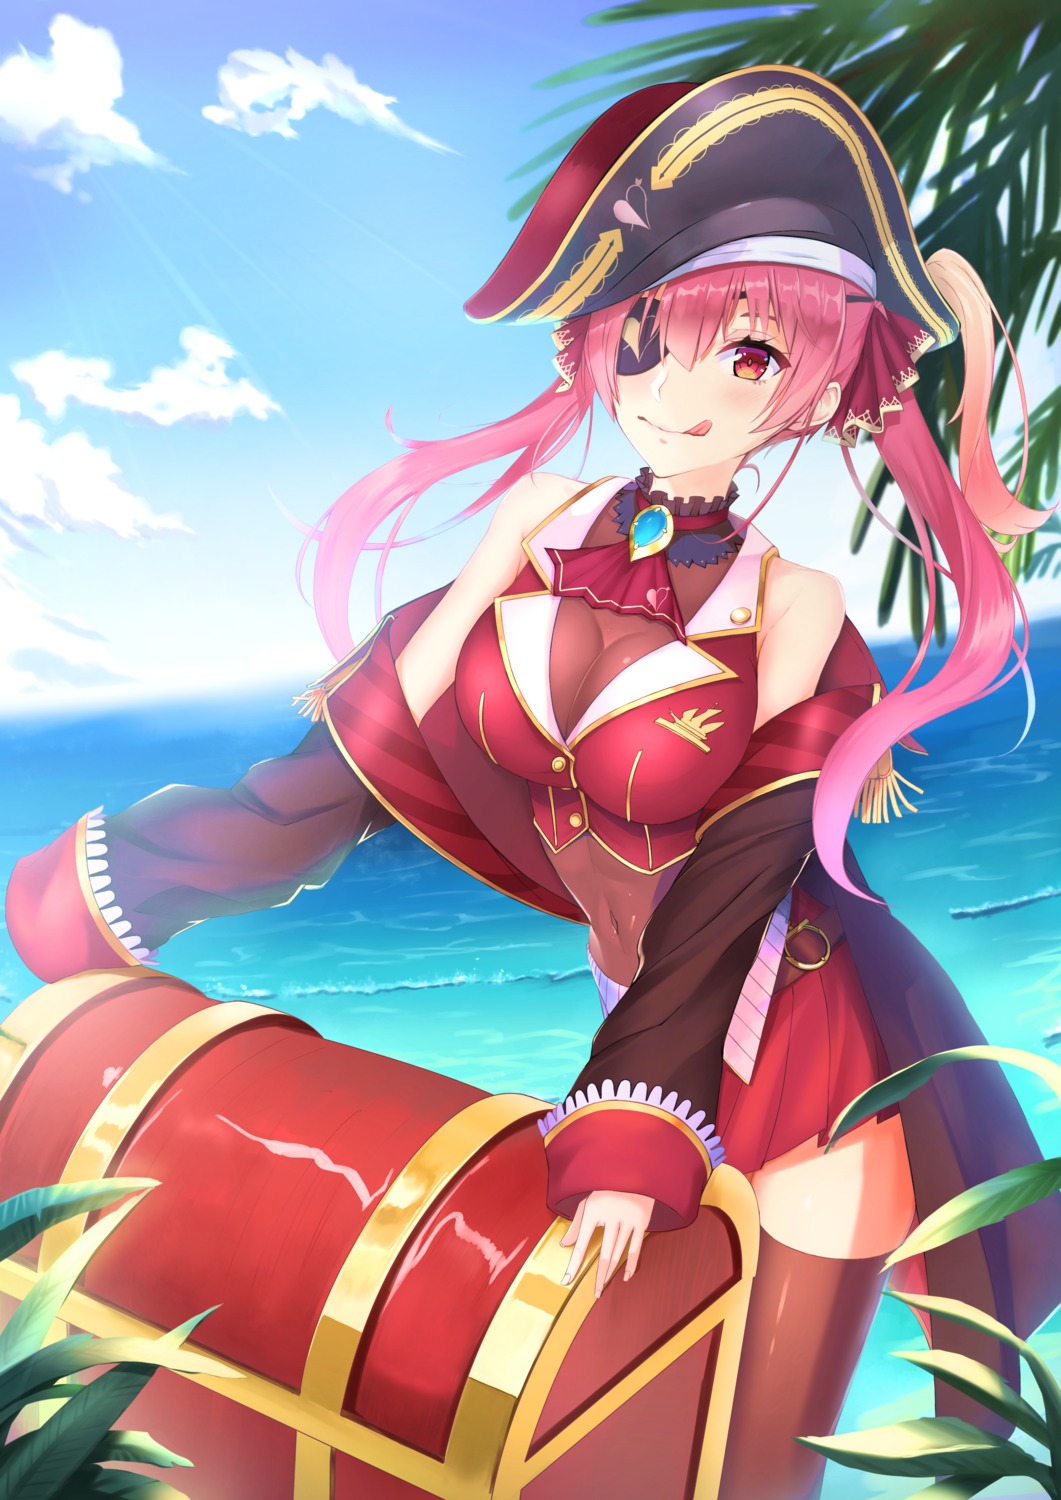 eyepatch hololive houshou_marine pirate sion_owatas thighhighs